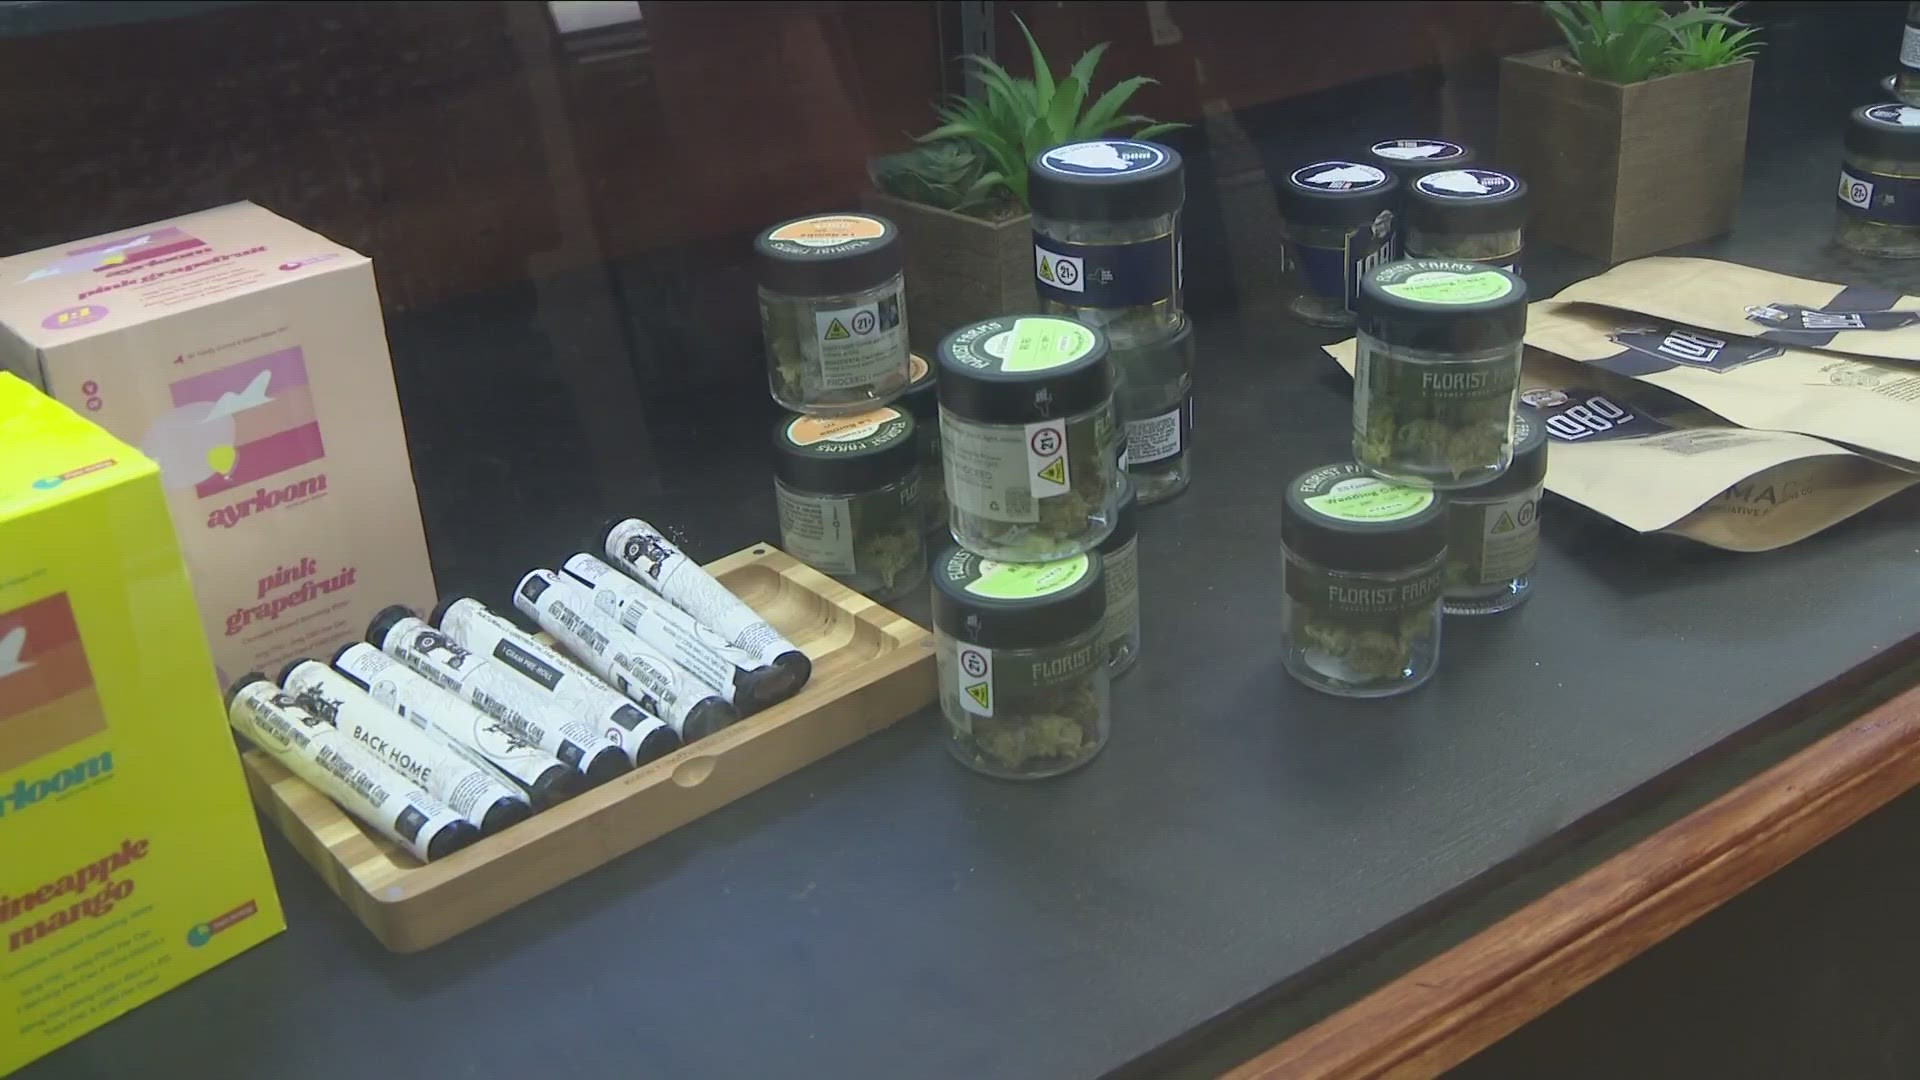 So far, our region will be awarded 22 dispensary licenses